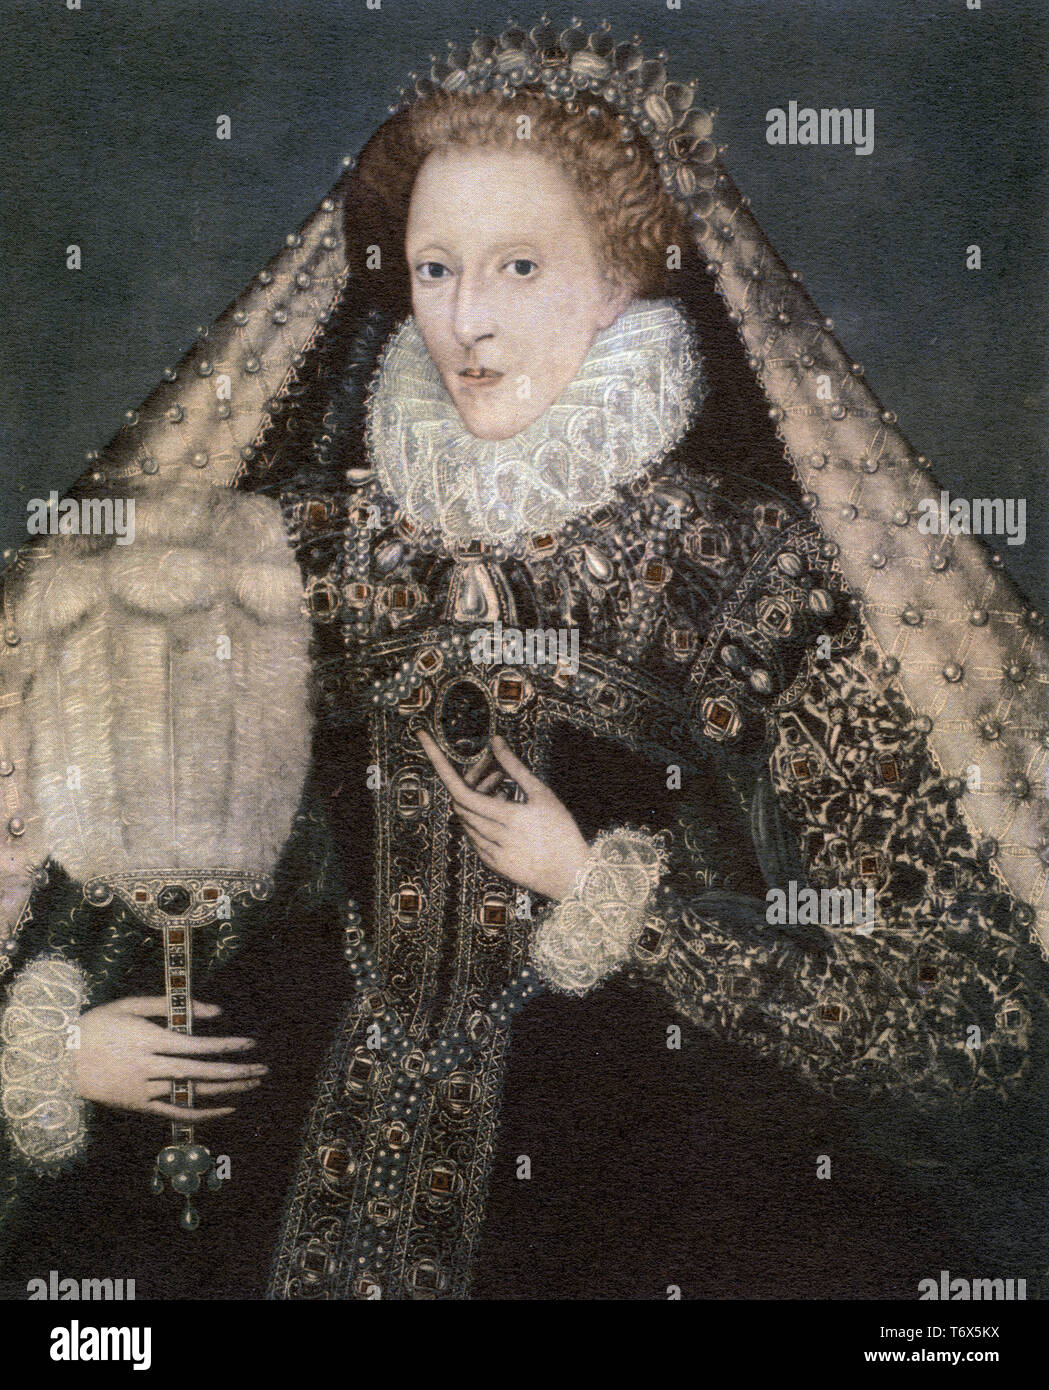 Elizabeth I (1533-1603). After Federico Zuccari, also known as Federico Zuccaro (c1540-1609). Elizabeth I, Queen of England and Ireland from 17 November 1558 until her death on 24 March 1603. Sometimes called The Virgin Queen, Gloriana or Good Queen Bess, Elizabeth was the last monarch of the House of Tudor. Stock Photo